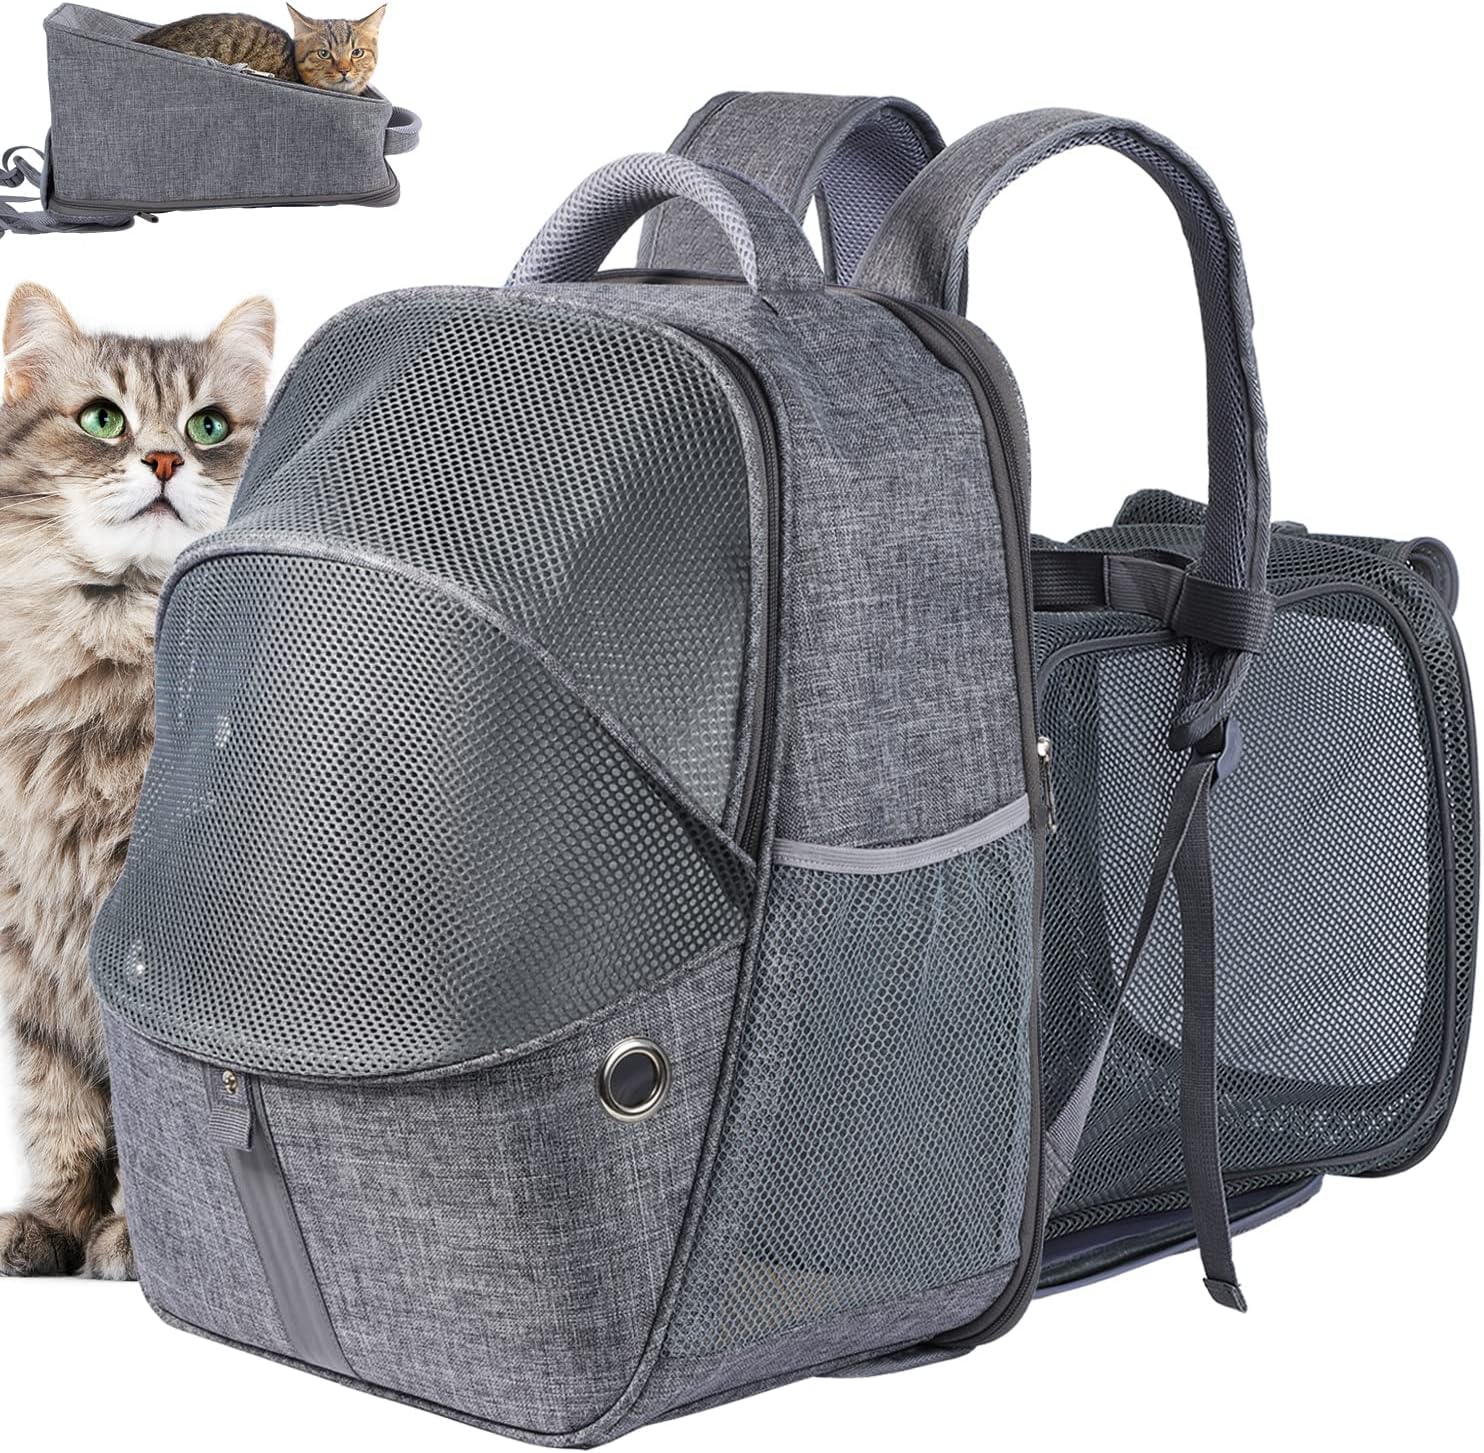 Travel Pet Backpack Dog Cats Carrier Soft Bag Puppy Outdoor Riding Hiking Bags 